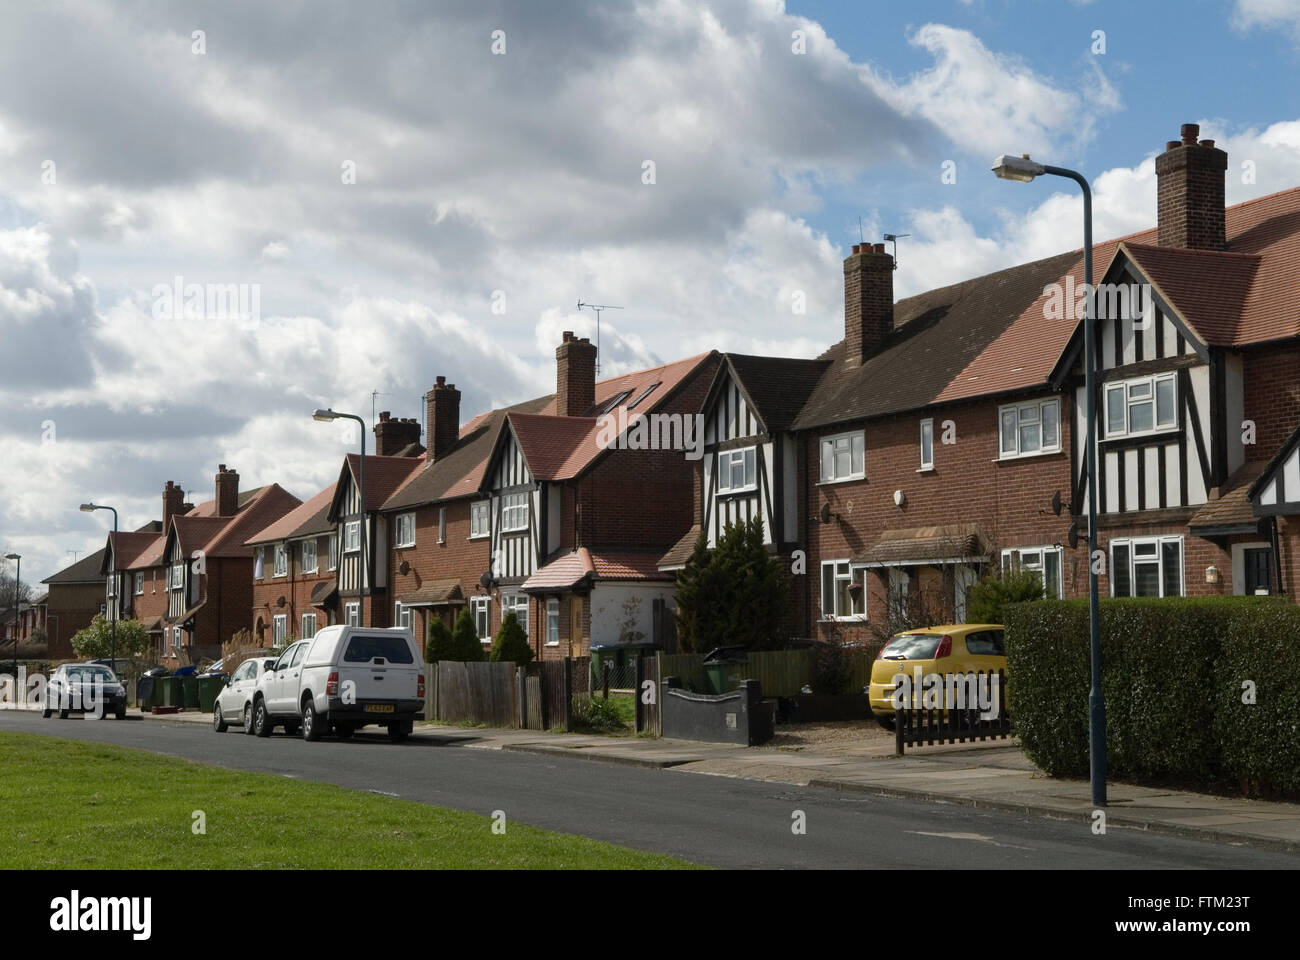 Housing semi detached homes, car and vans parked outside south London 2016  2010s UK HOMER SYKES Stock Photo - Alamy